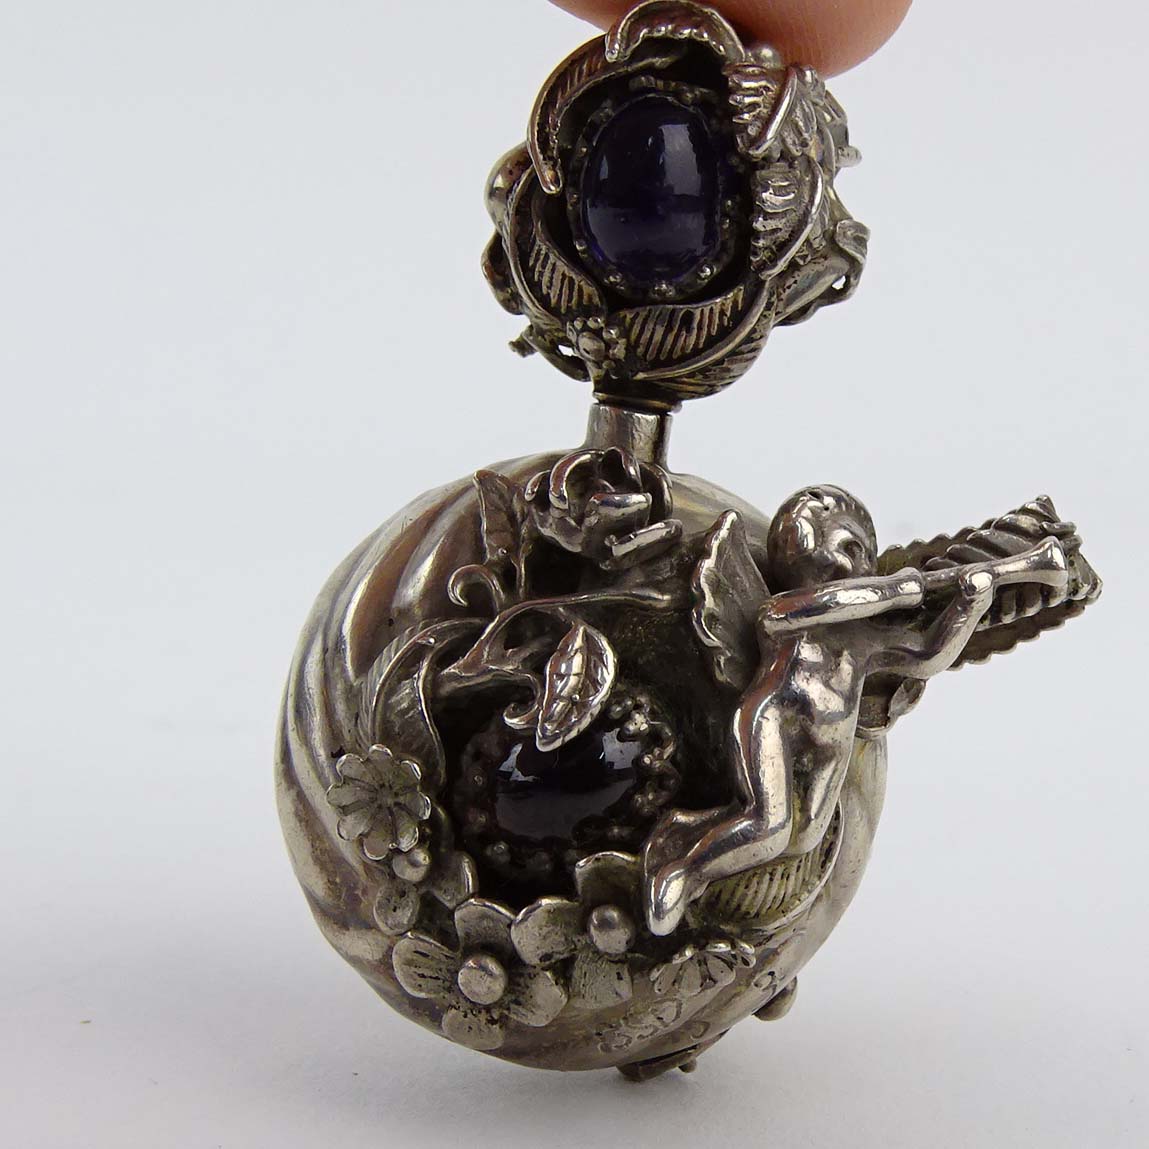 Art Nouveau style Sterling Silver Pendant Scent/Snuff Bottle with Amethyst and Garnet Accents; 935 Silver and Marcasite Chariot Brooch; English Sterling Silver Brooch Frame; American 950 Silver and Onyx Pendant and Russian Painted Shell Brooch.